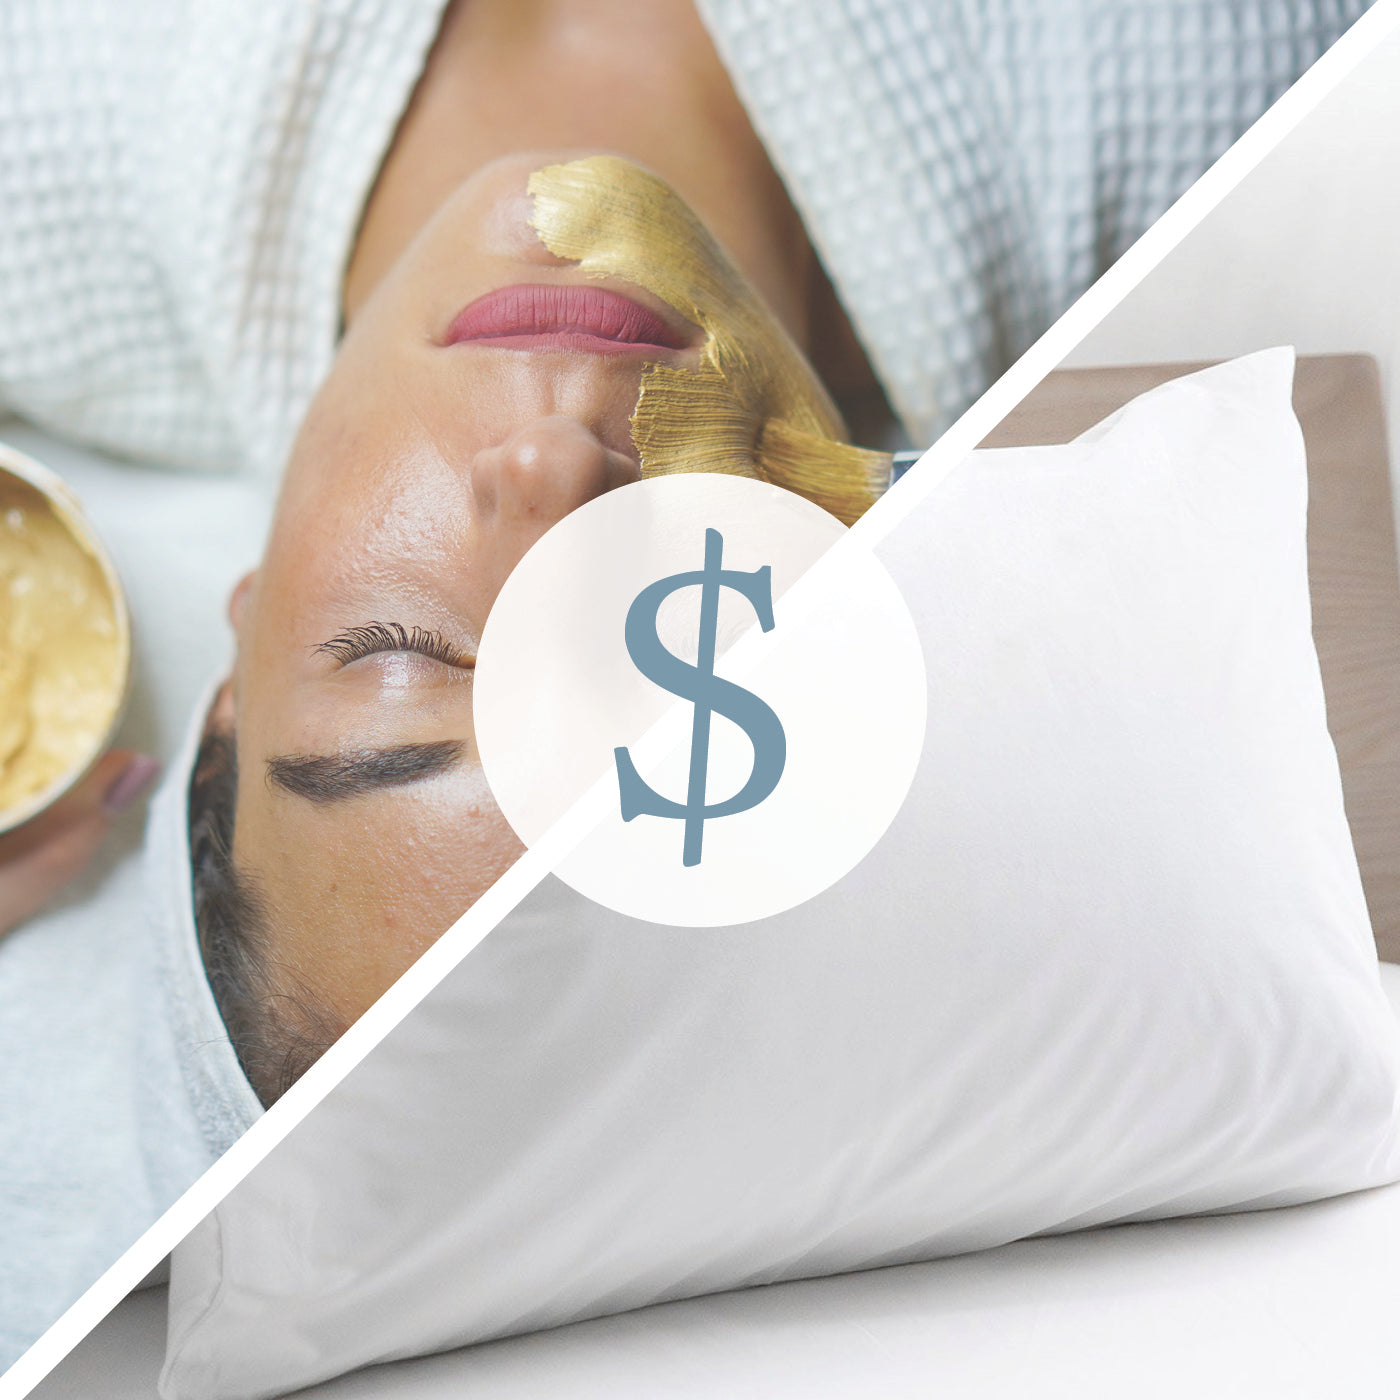 What Does a Good Sleep Cost?